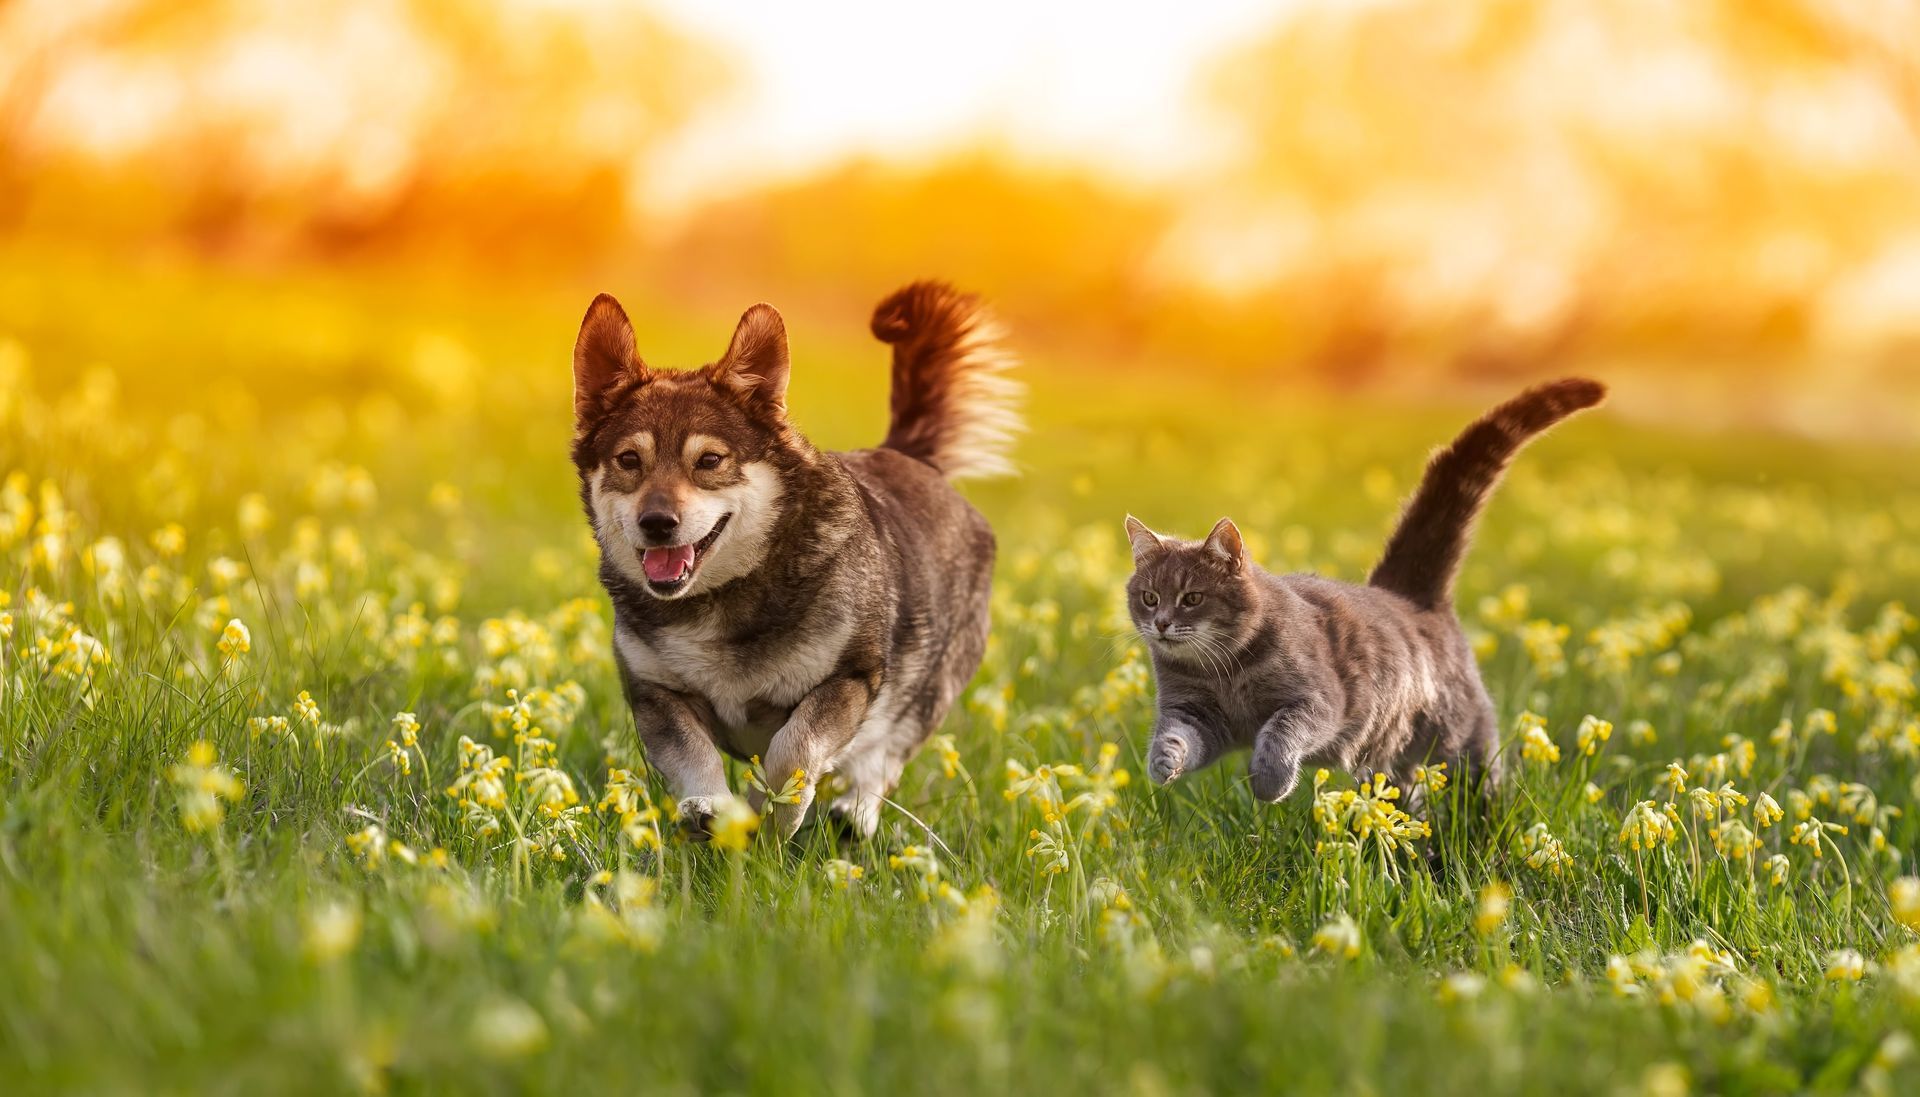 a dog and a cat are running in a field of flowers .